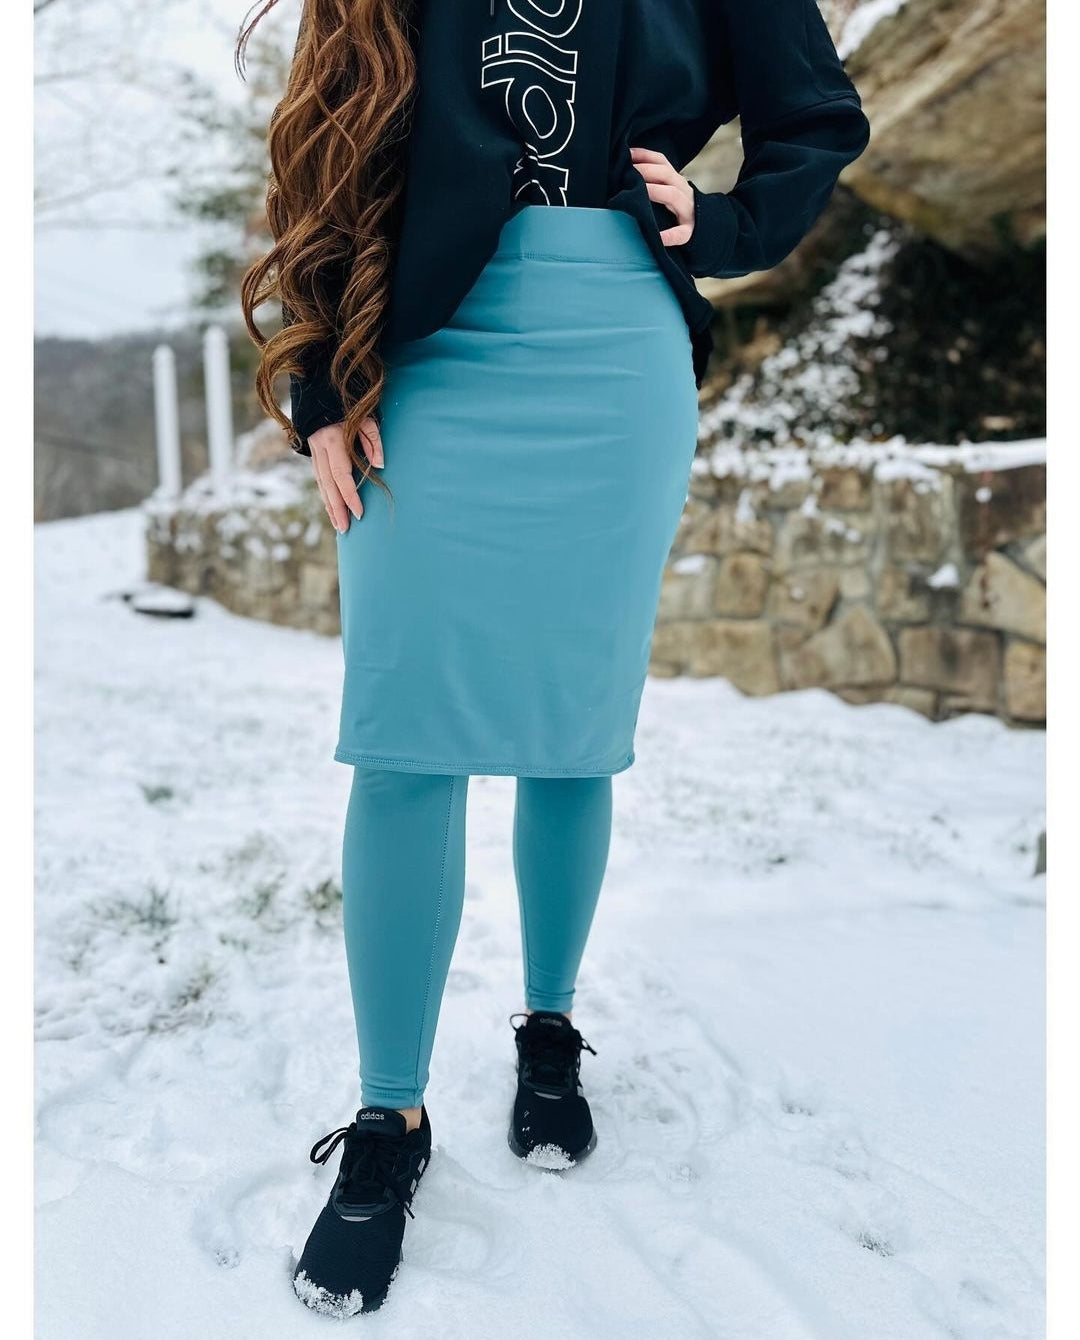 Tiffany Blue Pencil Style Athletic Skirt with Built in Leggings